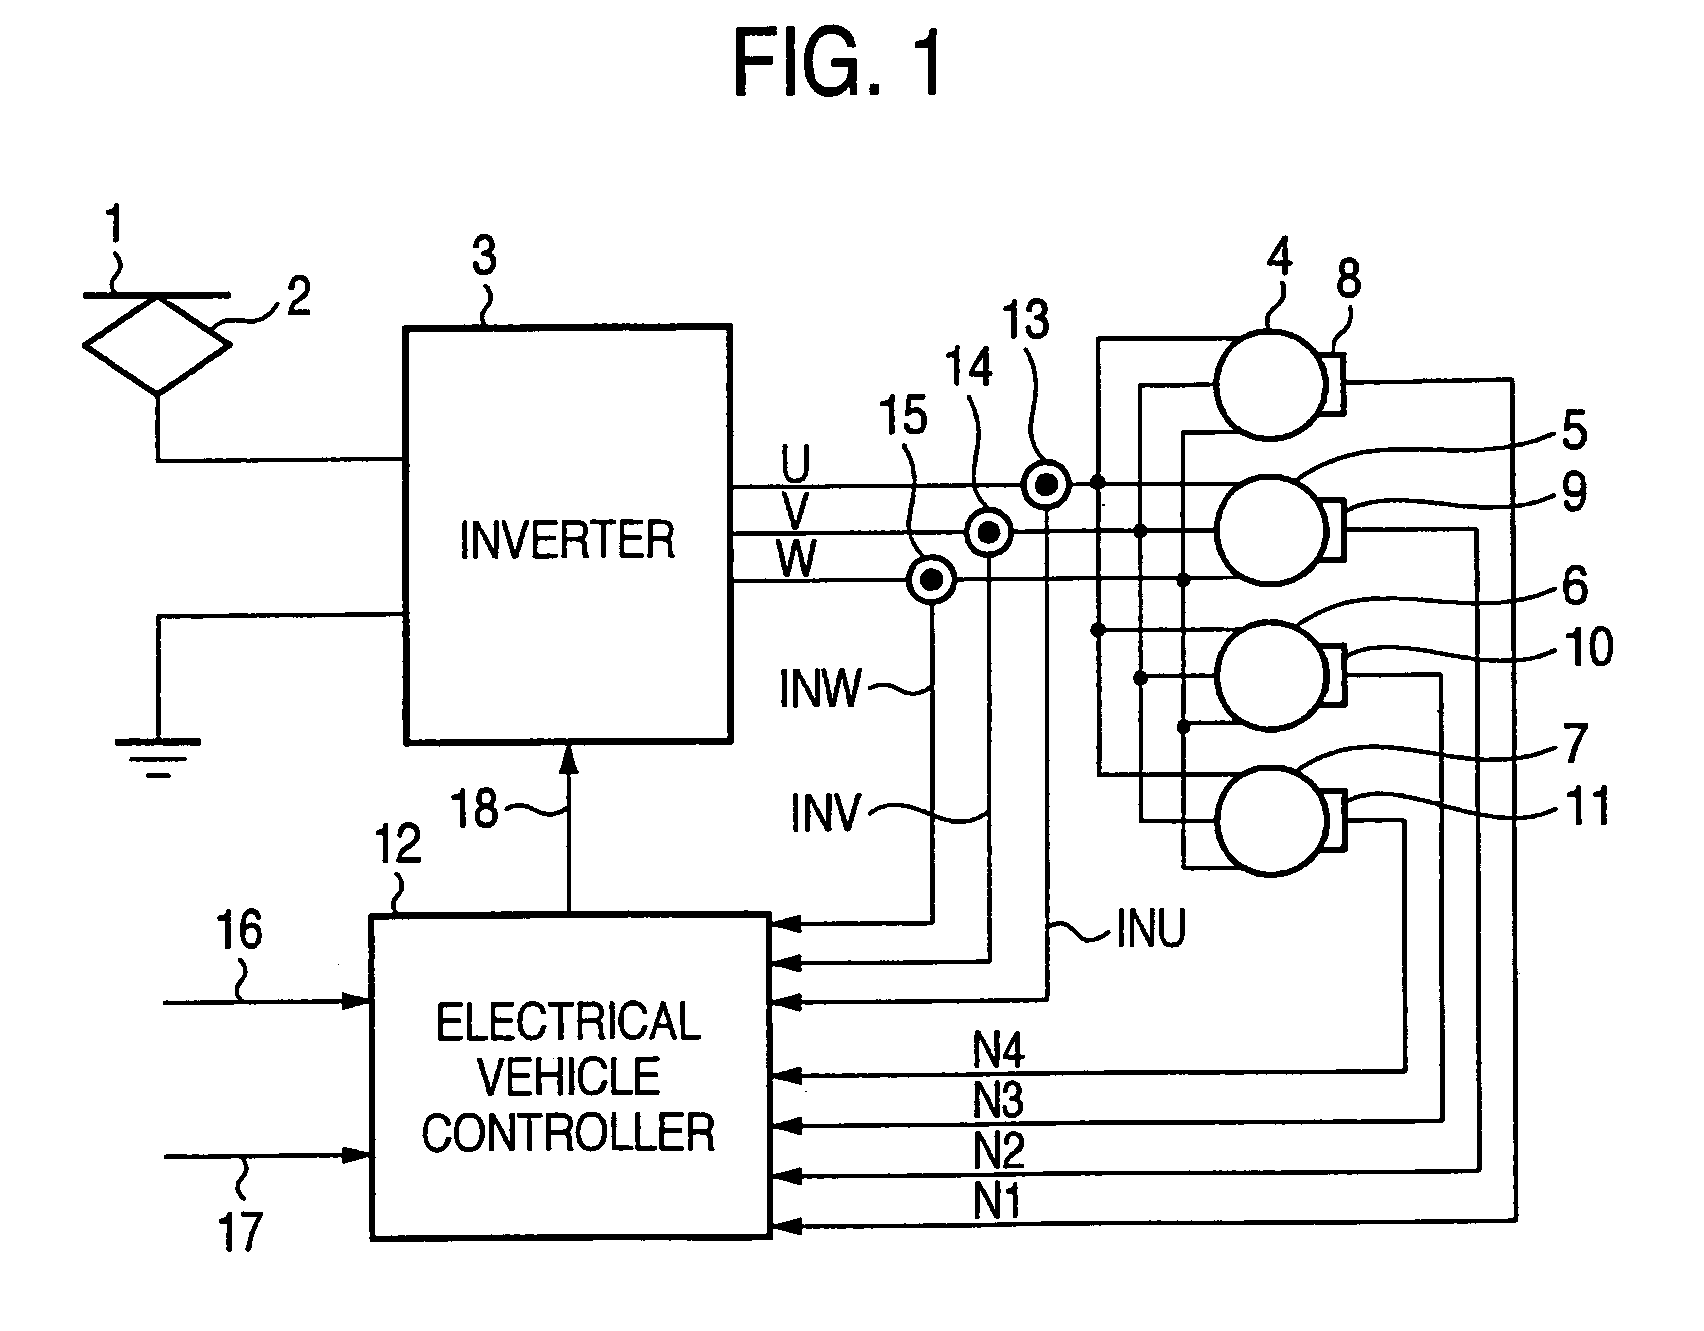 Electrical vehicle controller